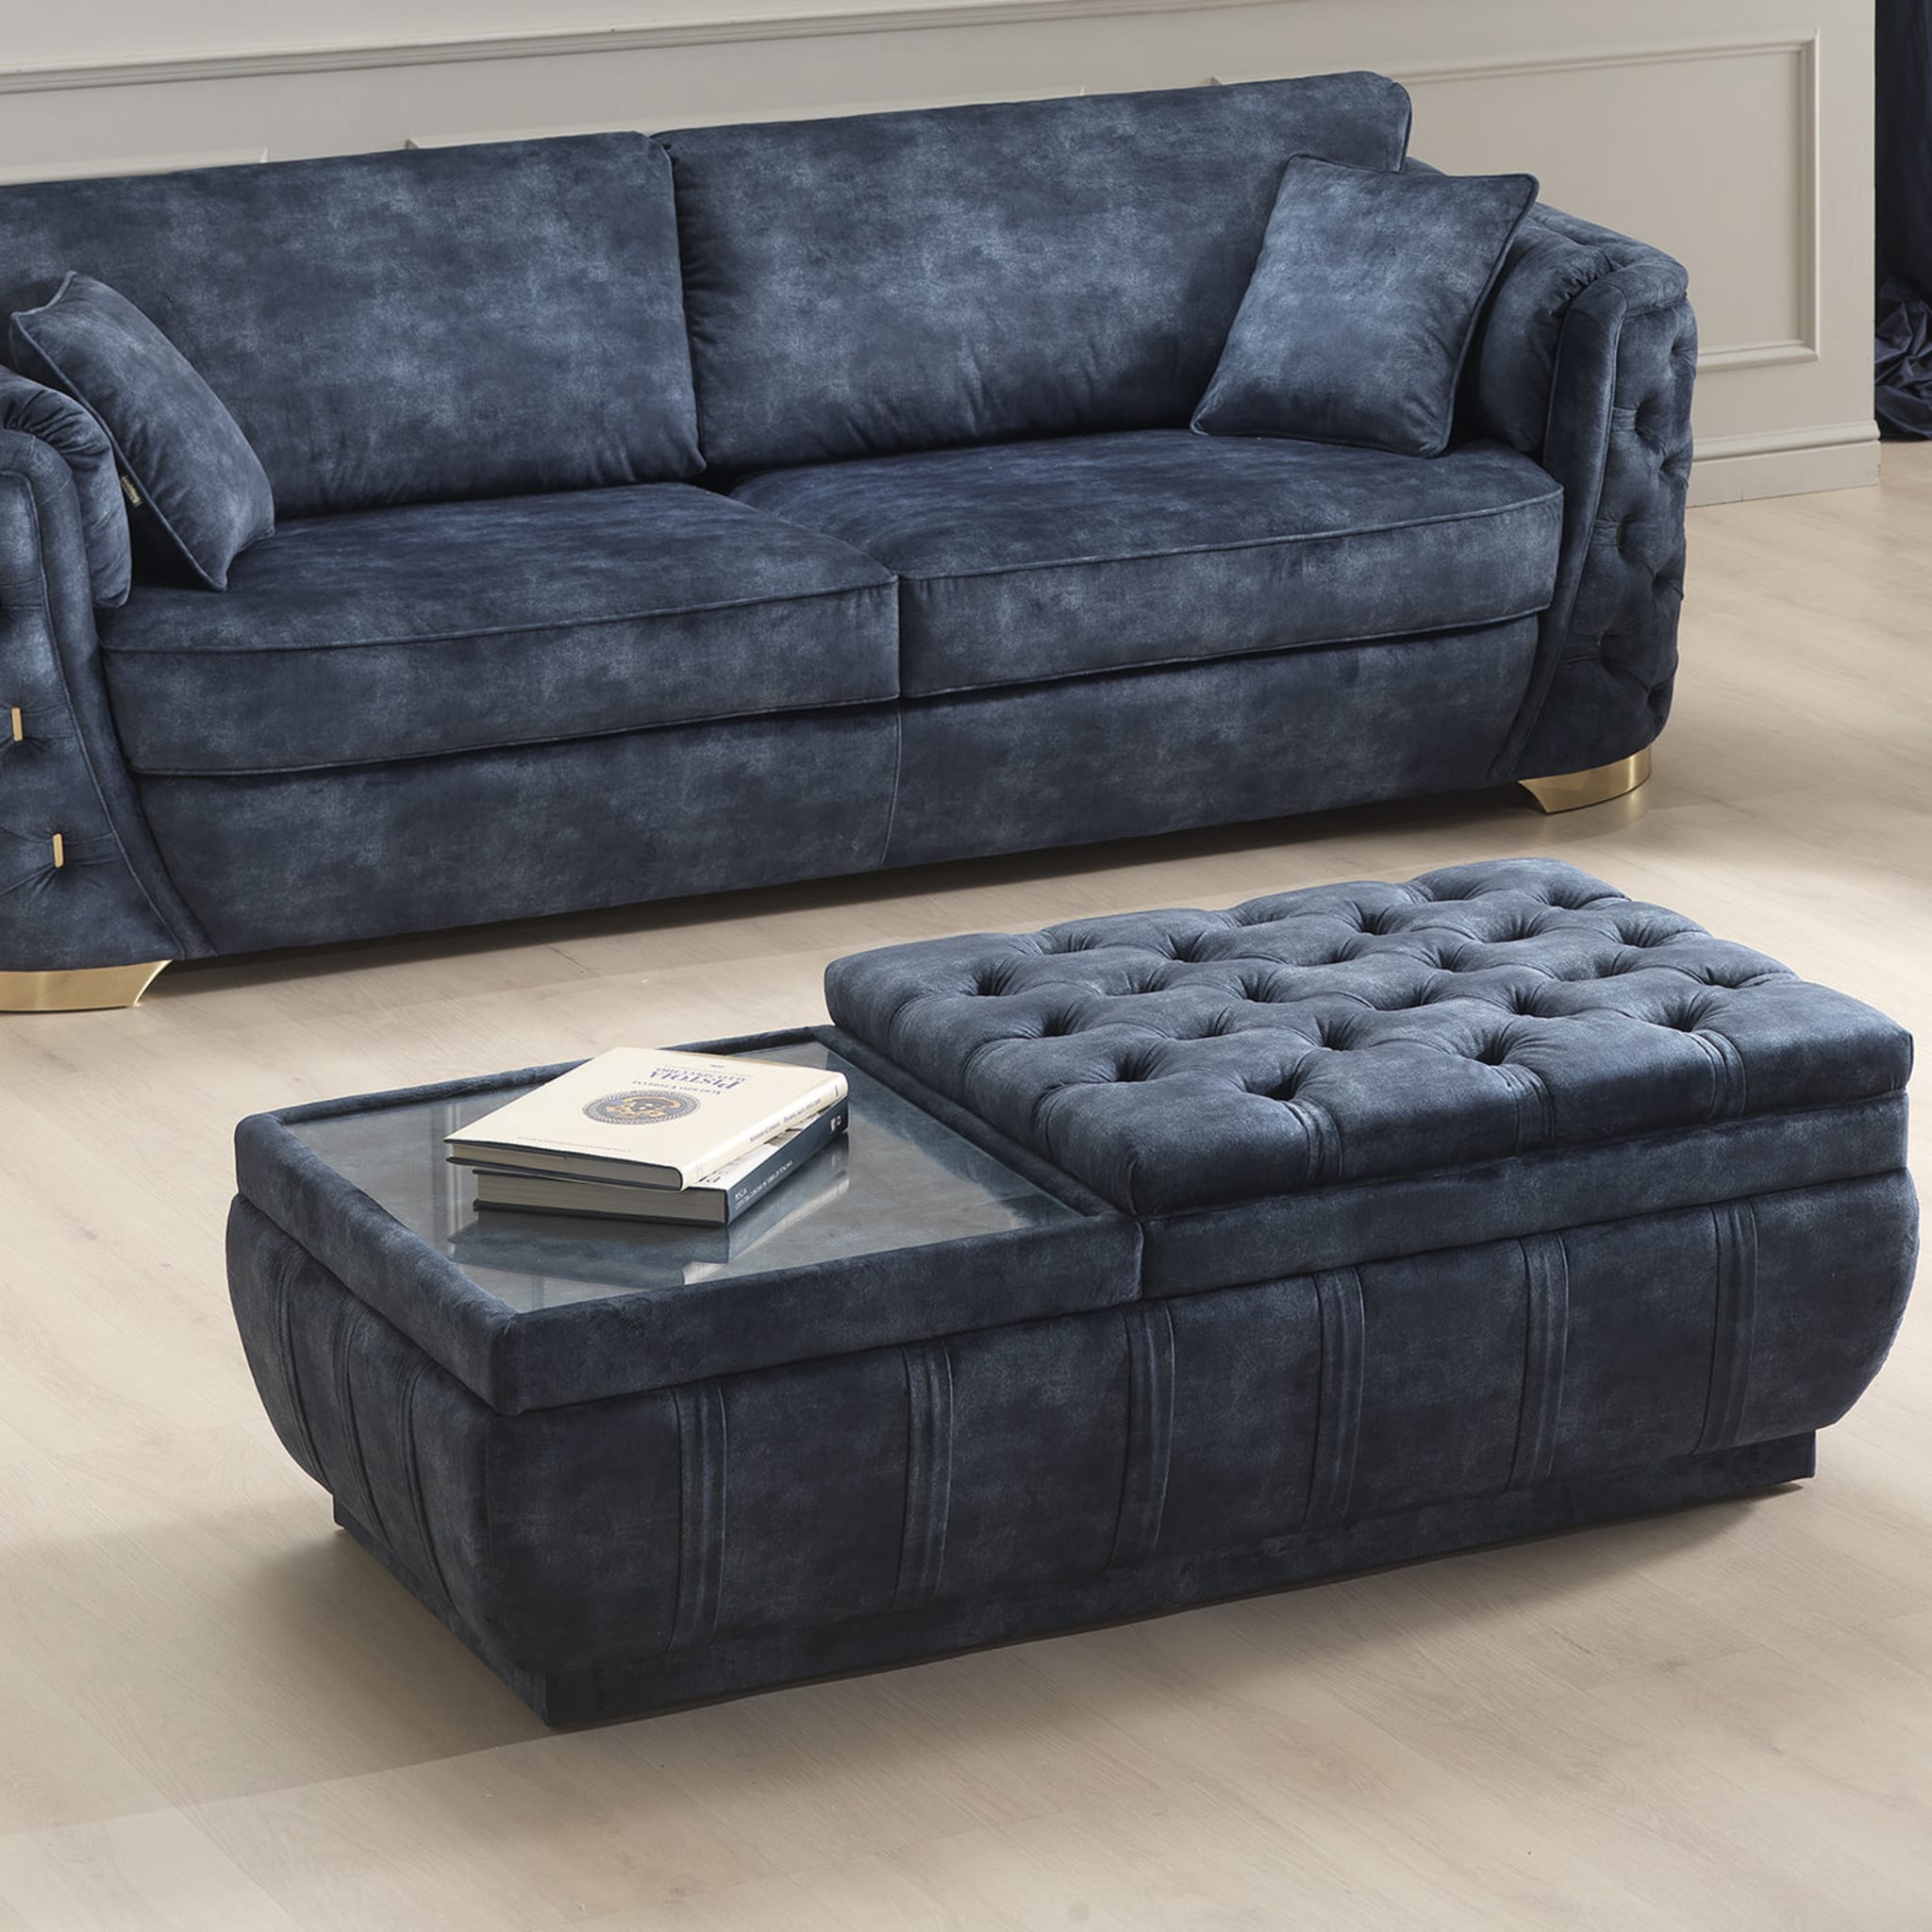 Starlight Plus Pouf with Coffee Table - Alternative view 1